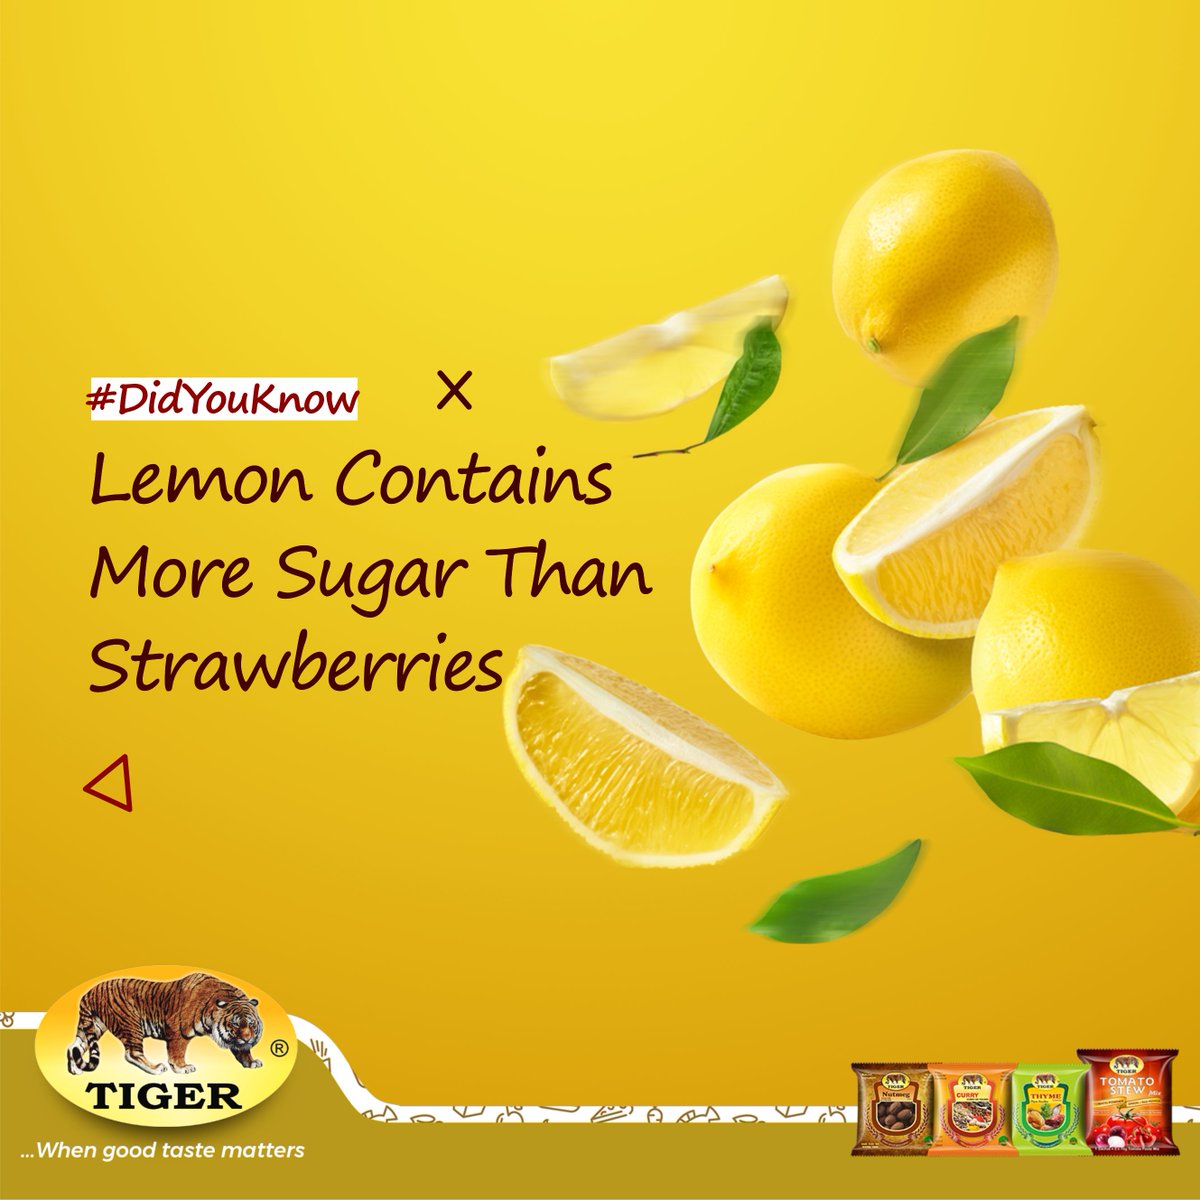 Did you know that lemons have more sugar in them than strawberries do? 🤔
Have you had strawberries before?

#DidYouKnow #TigerSpices #WhenGoodTasteMatters #Spices #Herbs #HerbsAndSpices